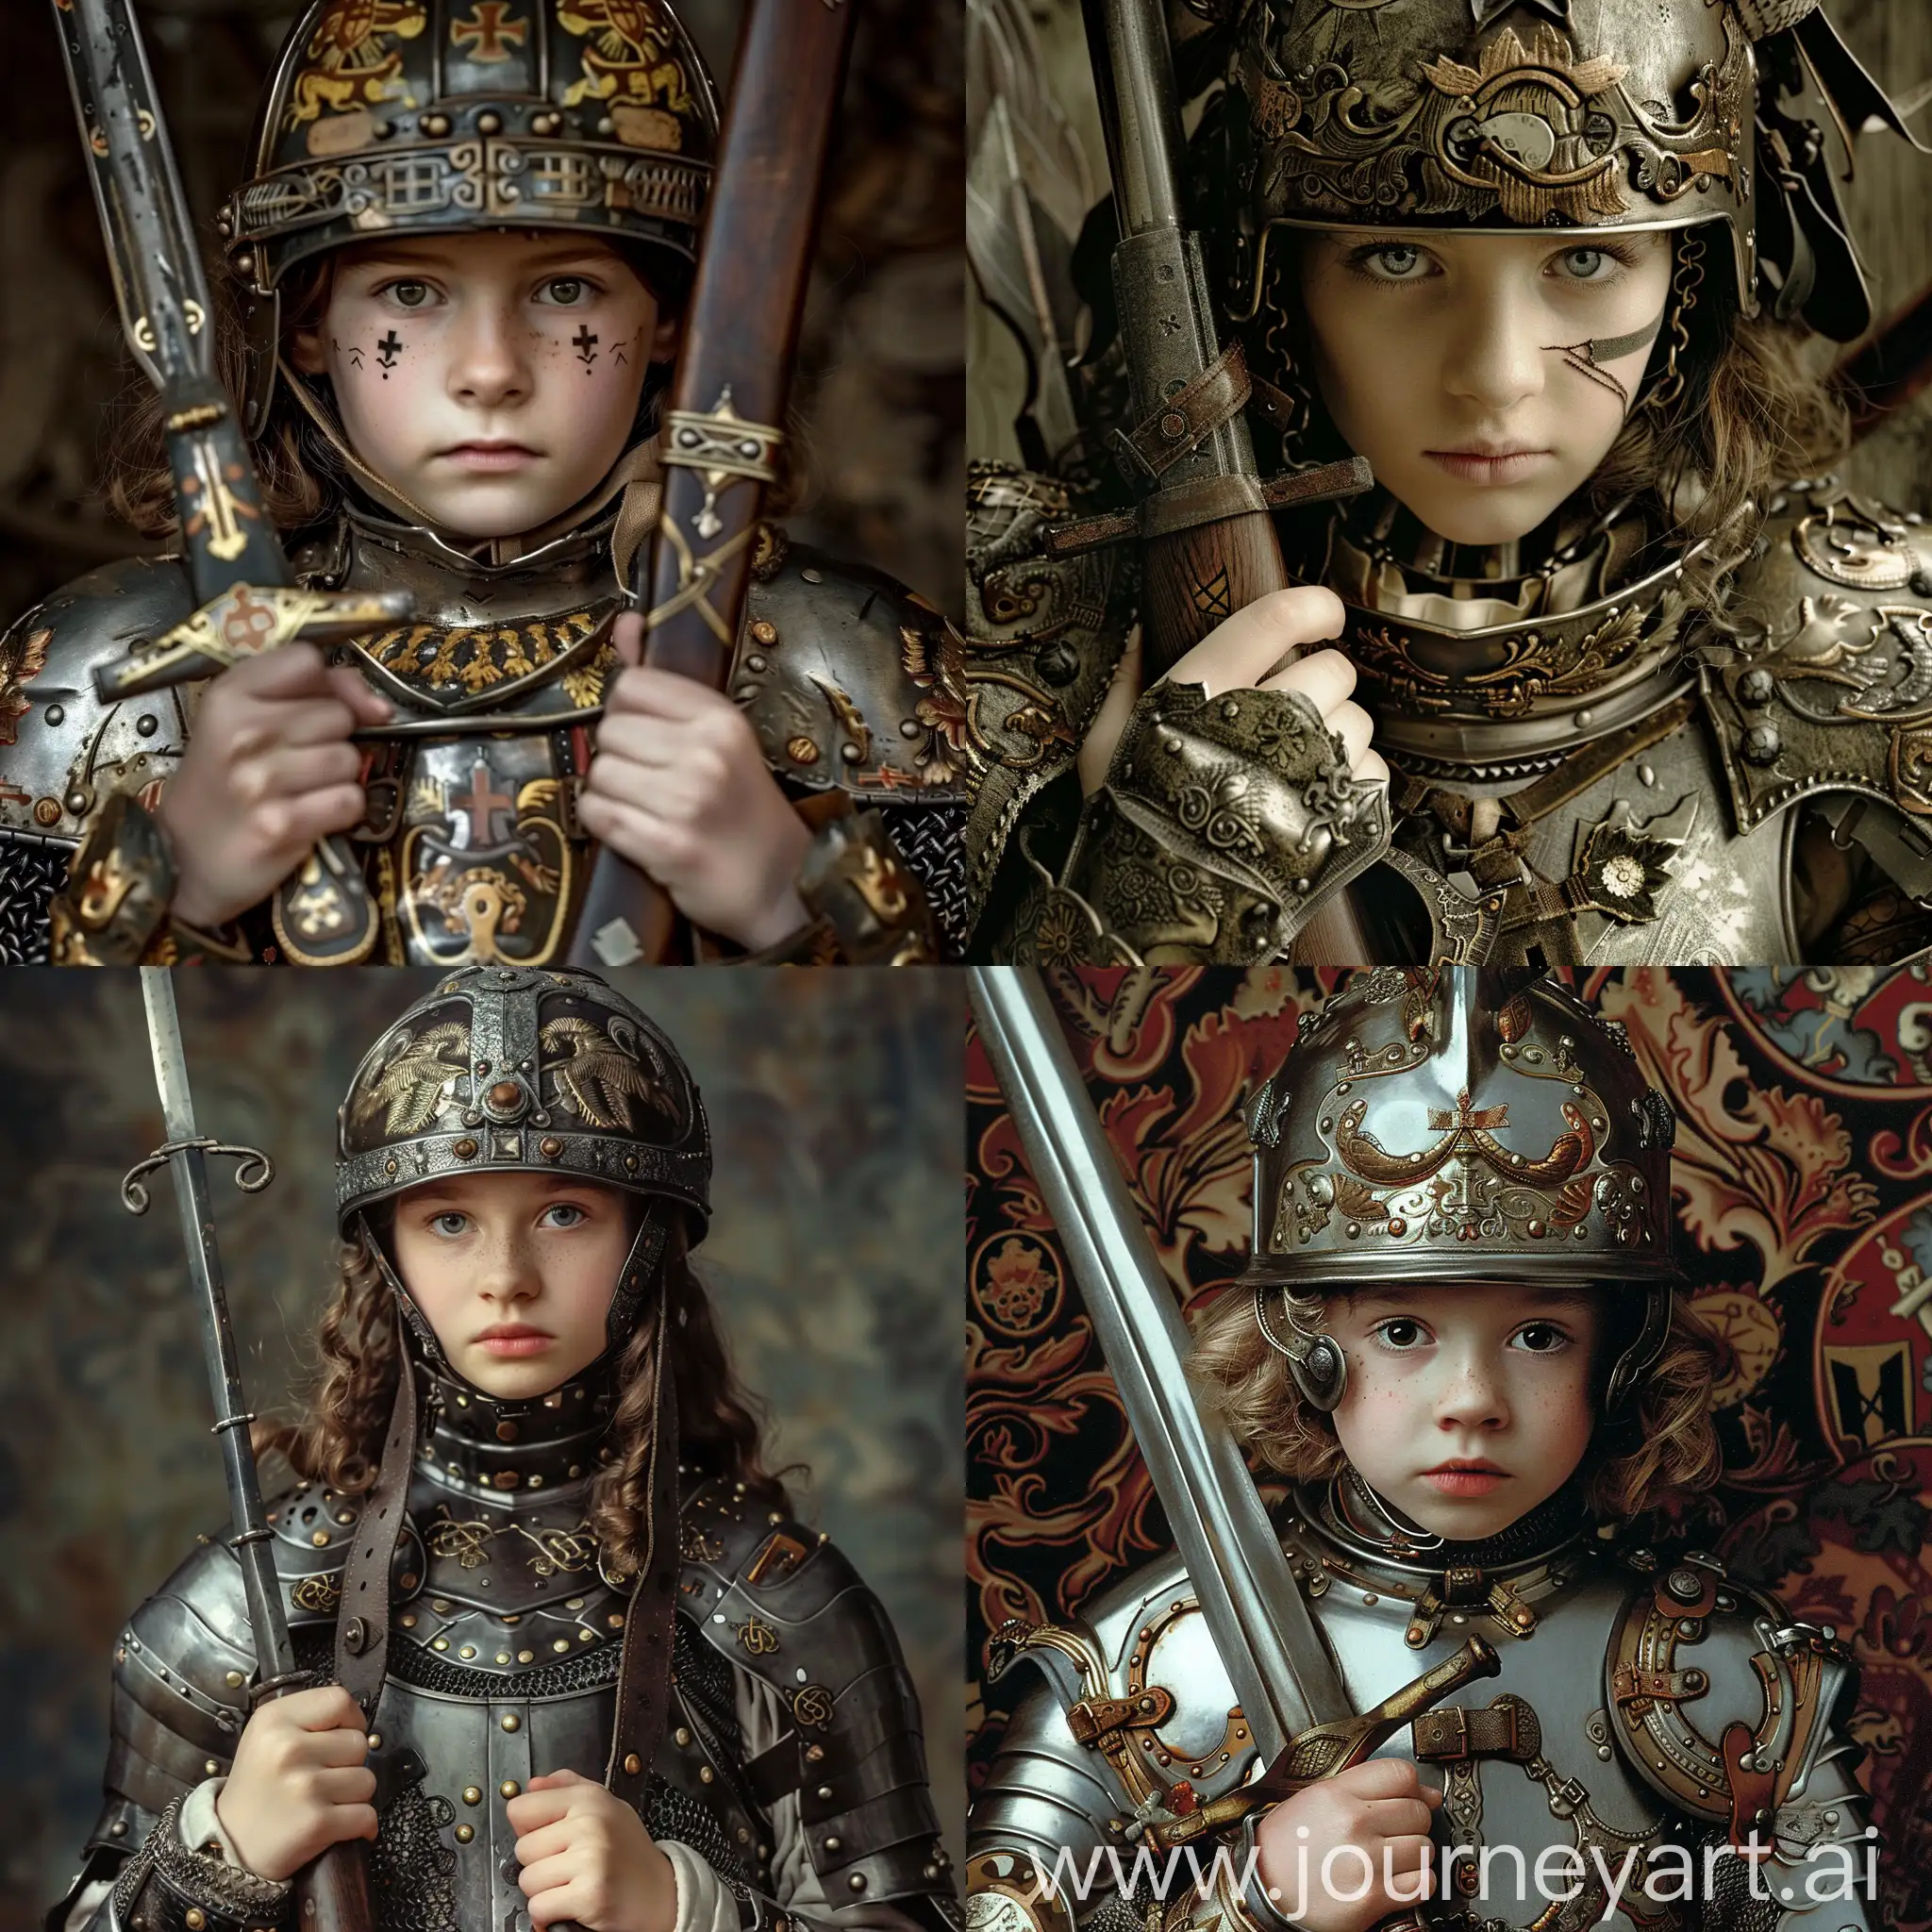 german girls about 13-14 years old, wearing armor and helmet, her hands holding german weapons, decorative motifs on the helmet, armor and weapons in the style of german